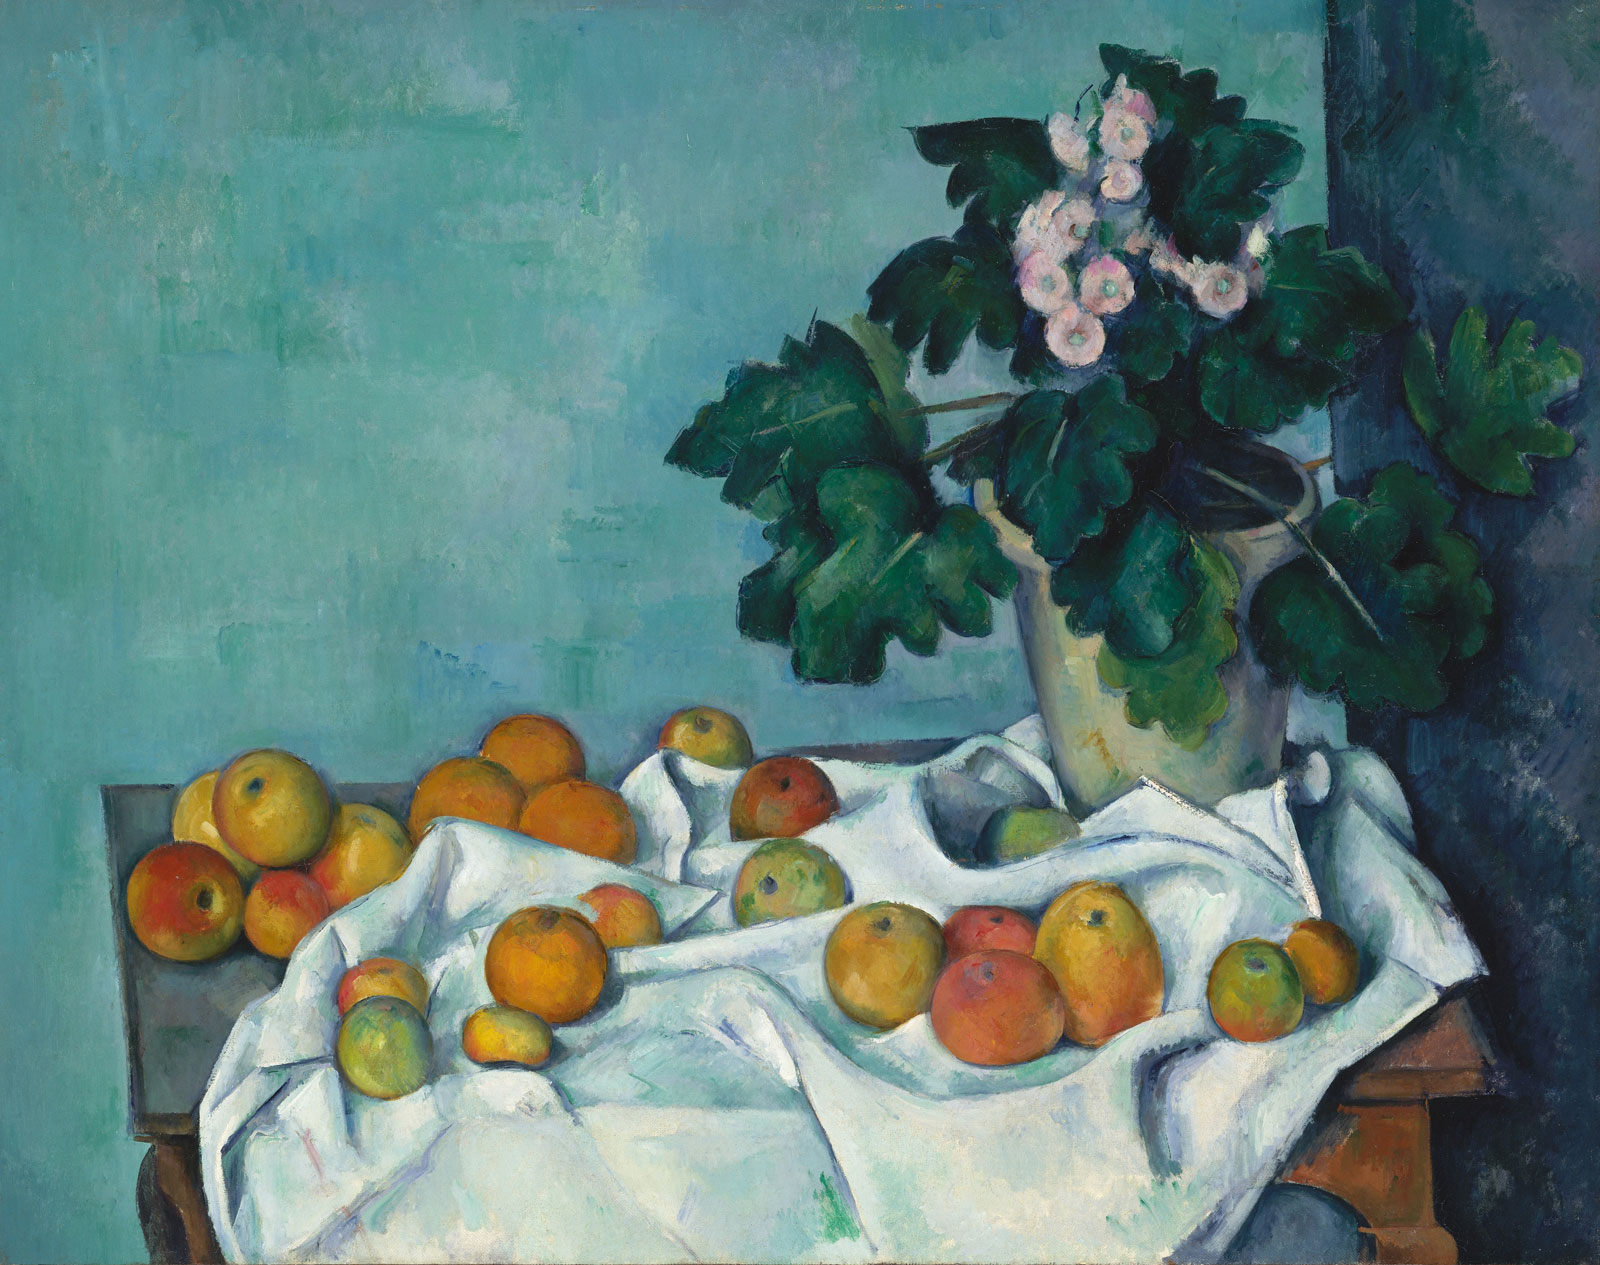 Paul Cézanne: Still Life with Apples and a Pot of Primroses, circa 1890